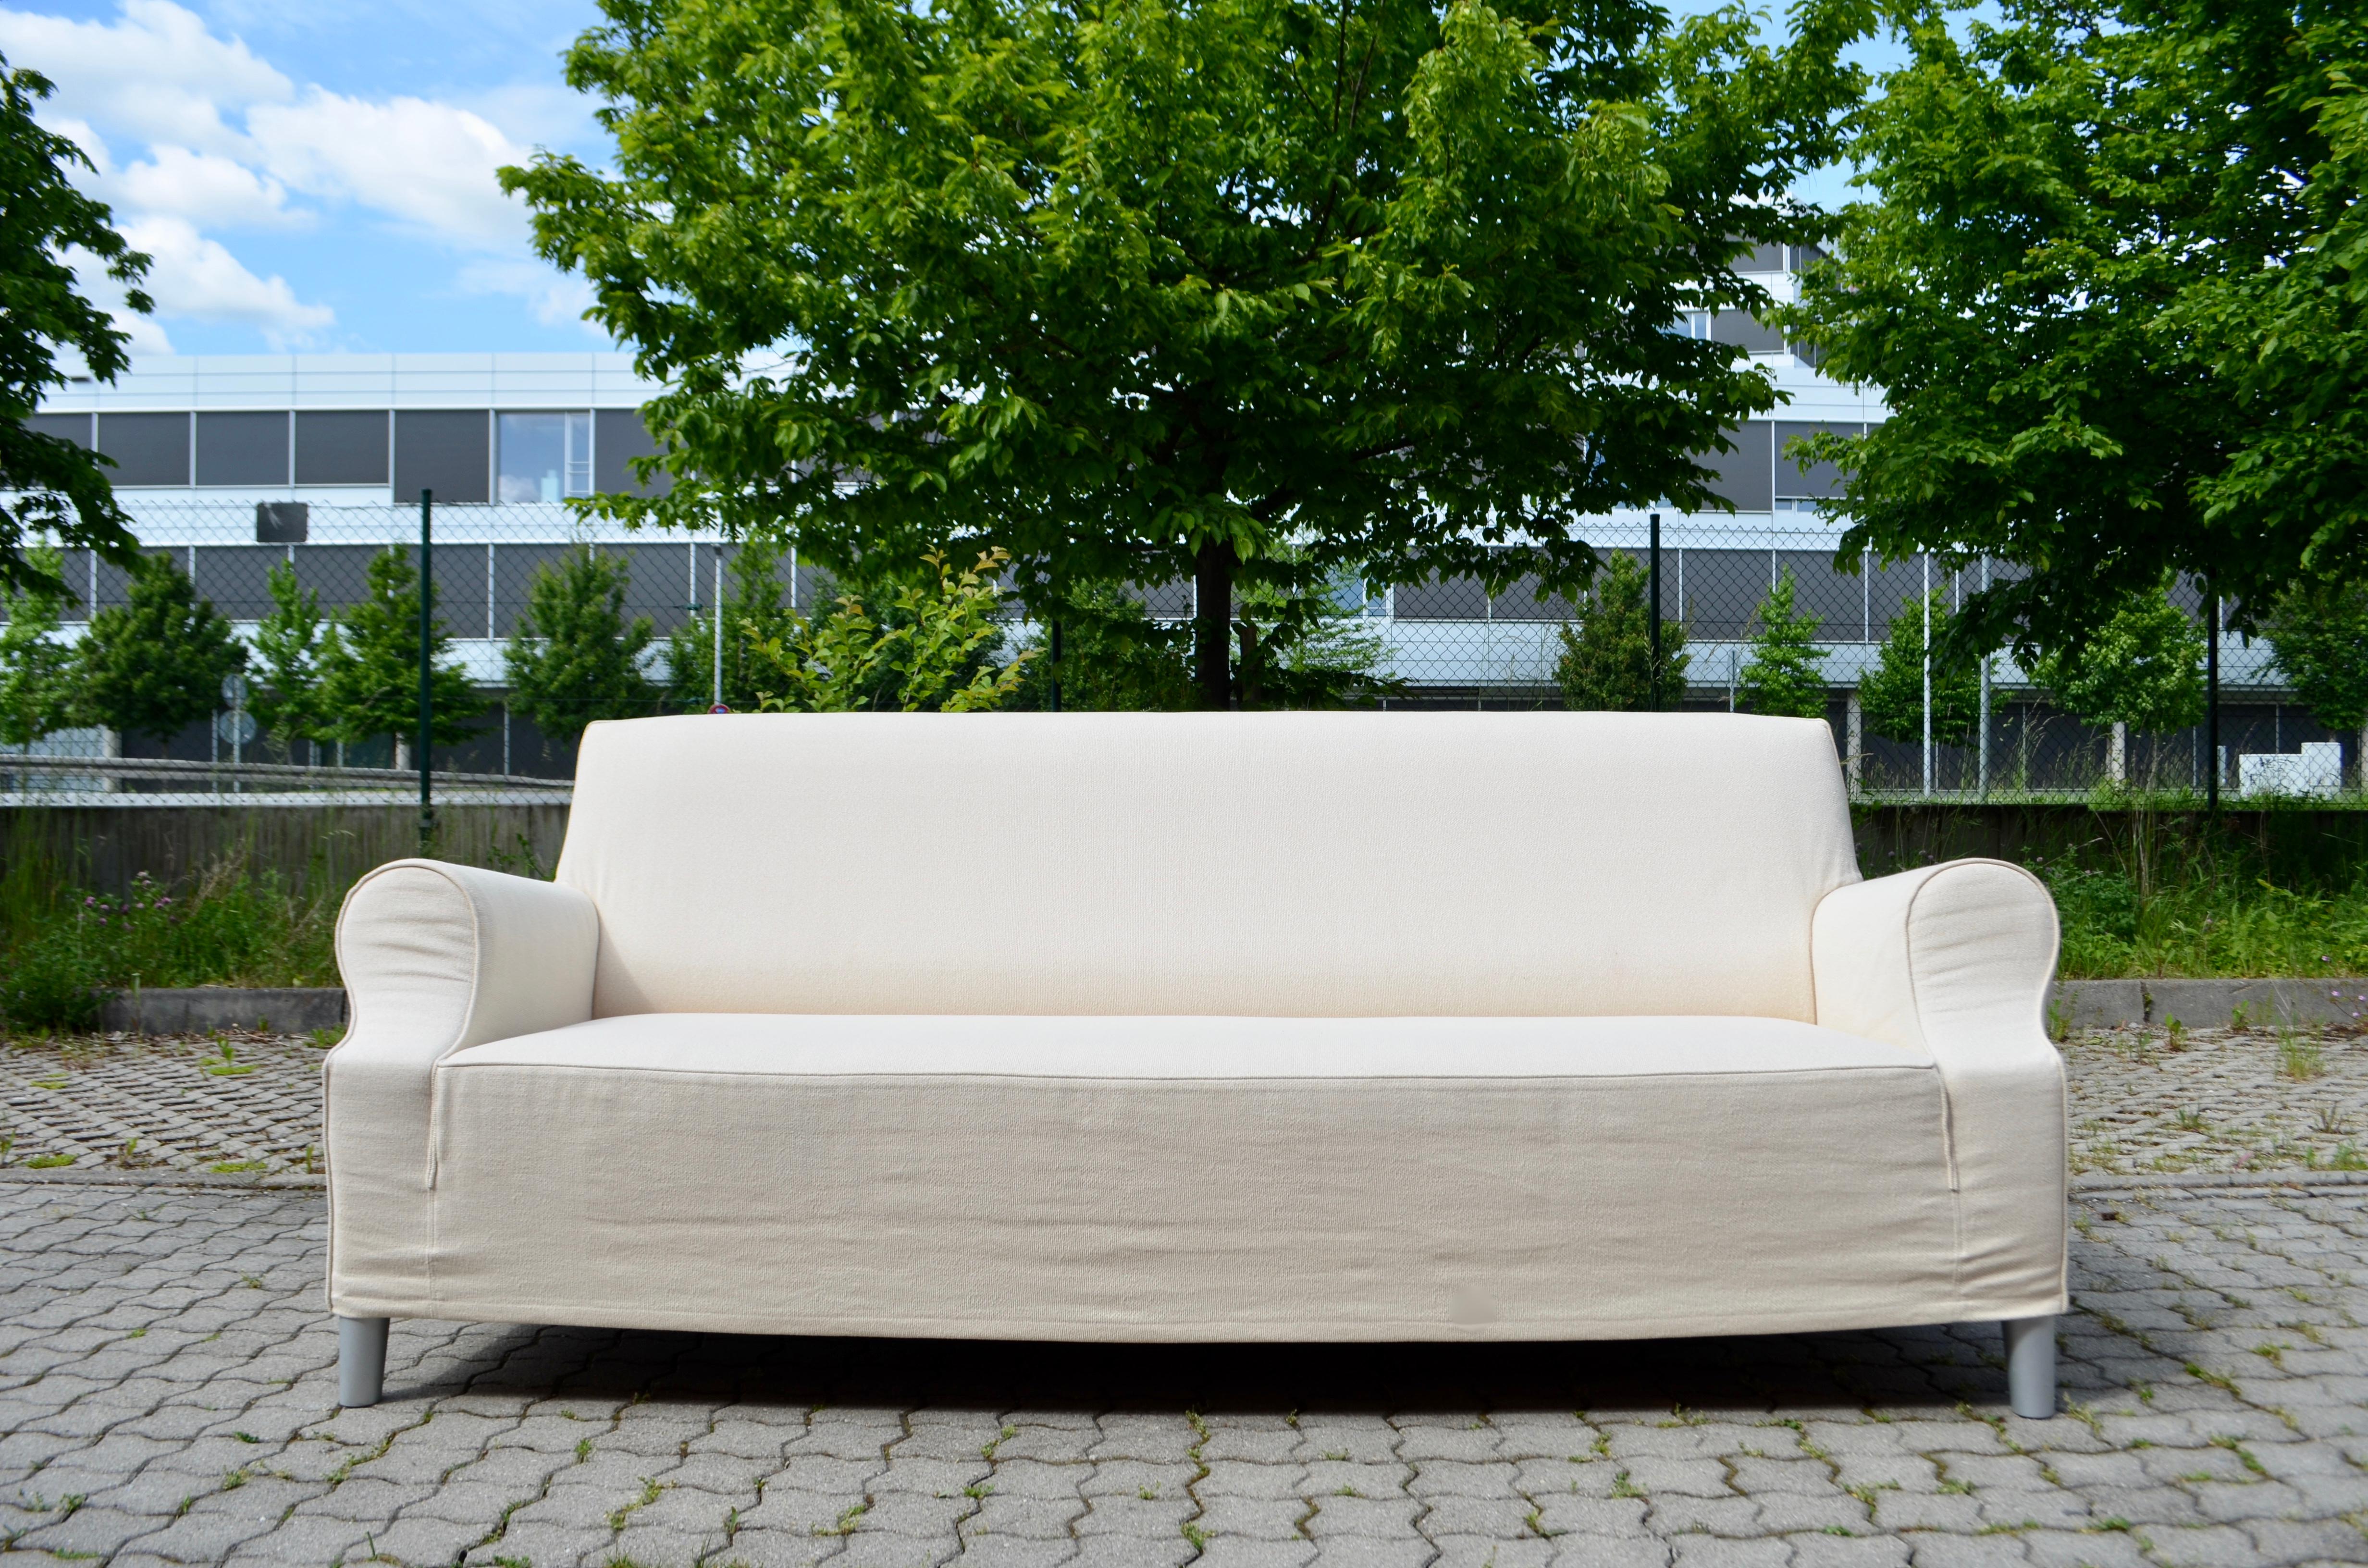 Philippe Starck designed this Model Lazy sofa.
This Model is the pure one without the shelves.
The fabric is white ecru and it is in a very good condition only little signs of wear.
Feet made of aluminium.
